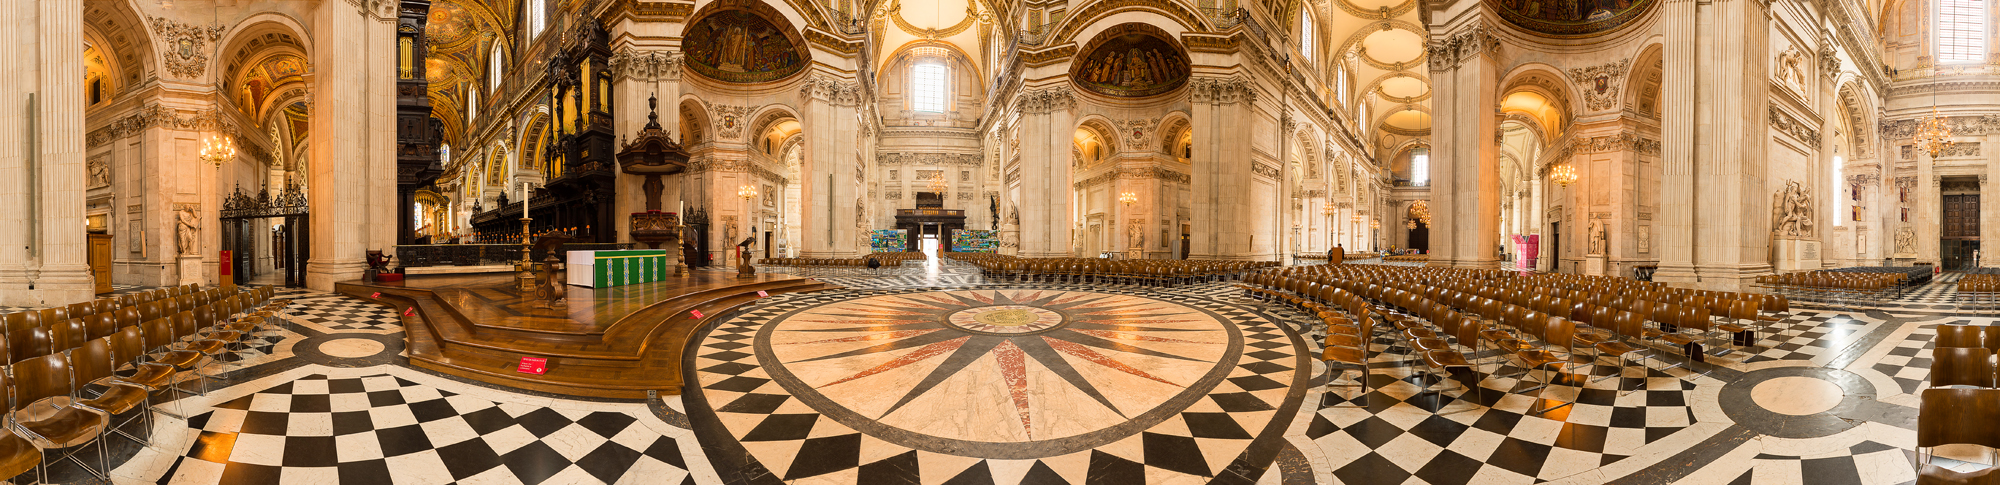 St Pauls Cathedral Collection Panorama Art